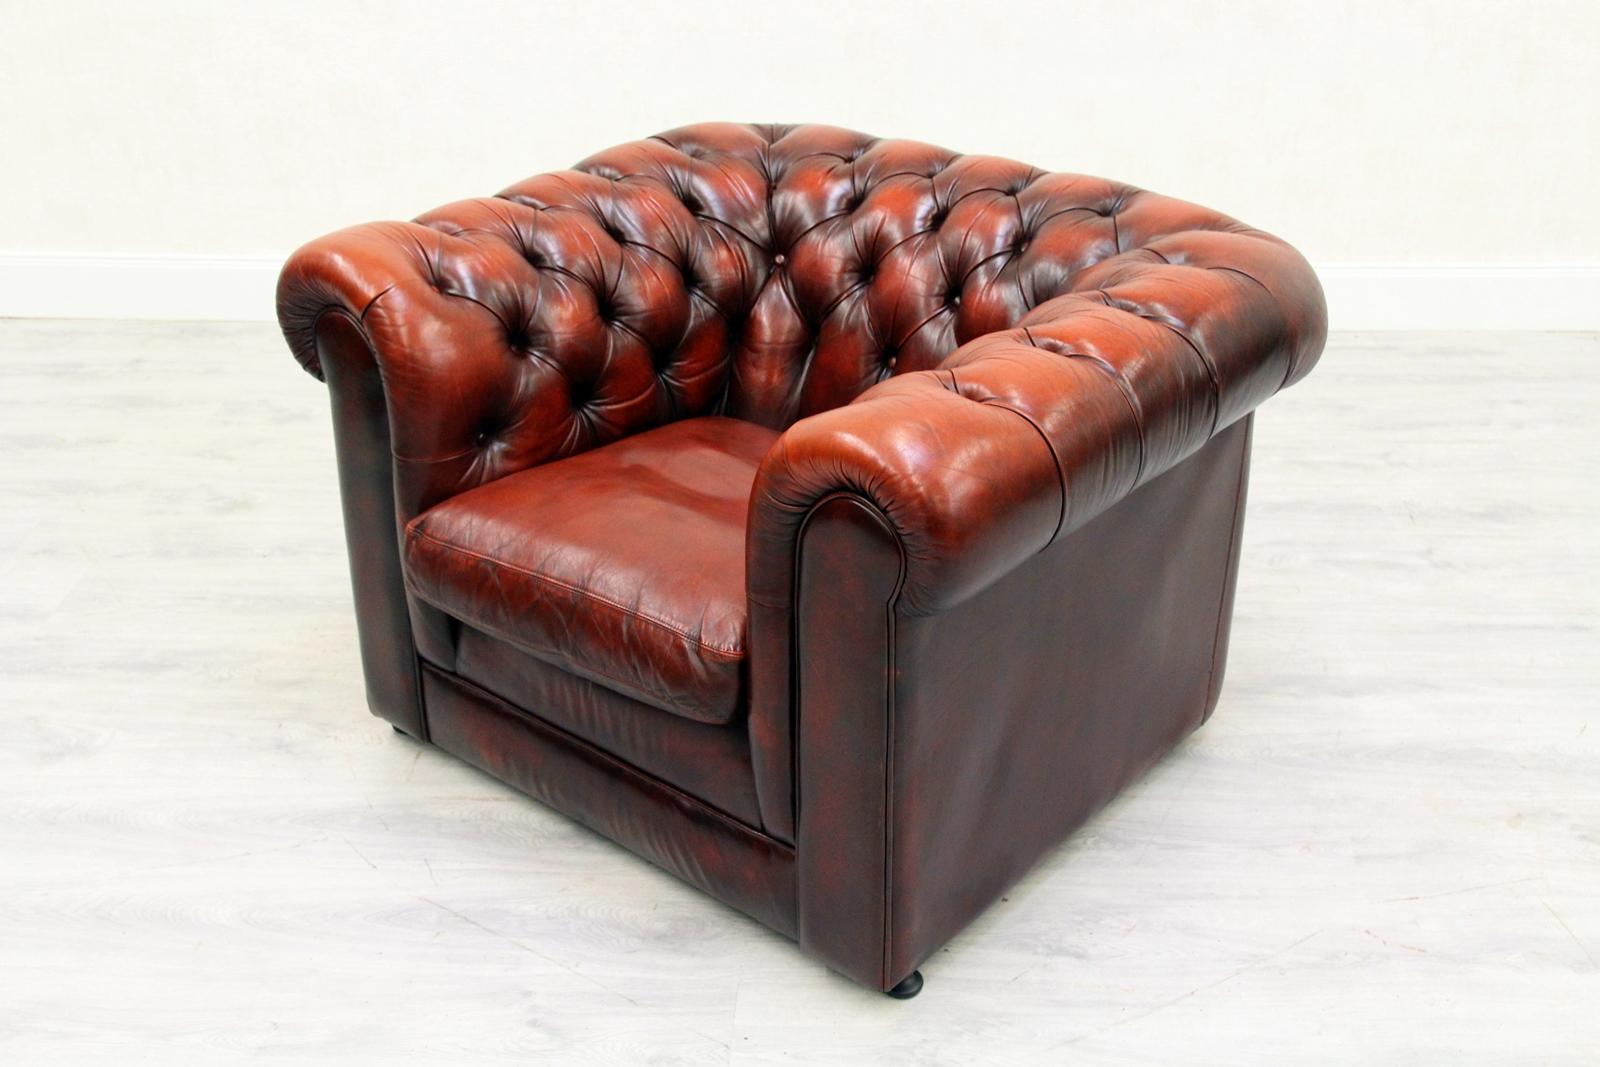 Late 20th Century Chesterfield Leather Armchair Antique Vintage English Armchair Oxblood For Sale